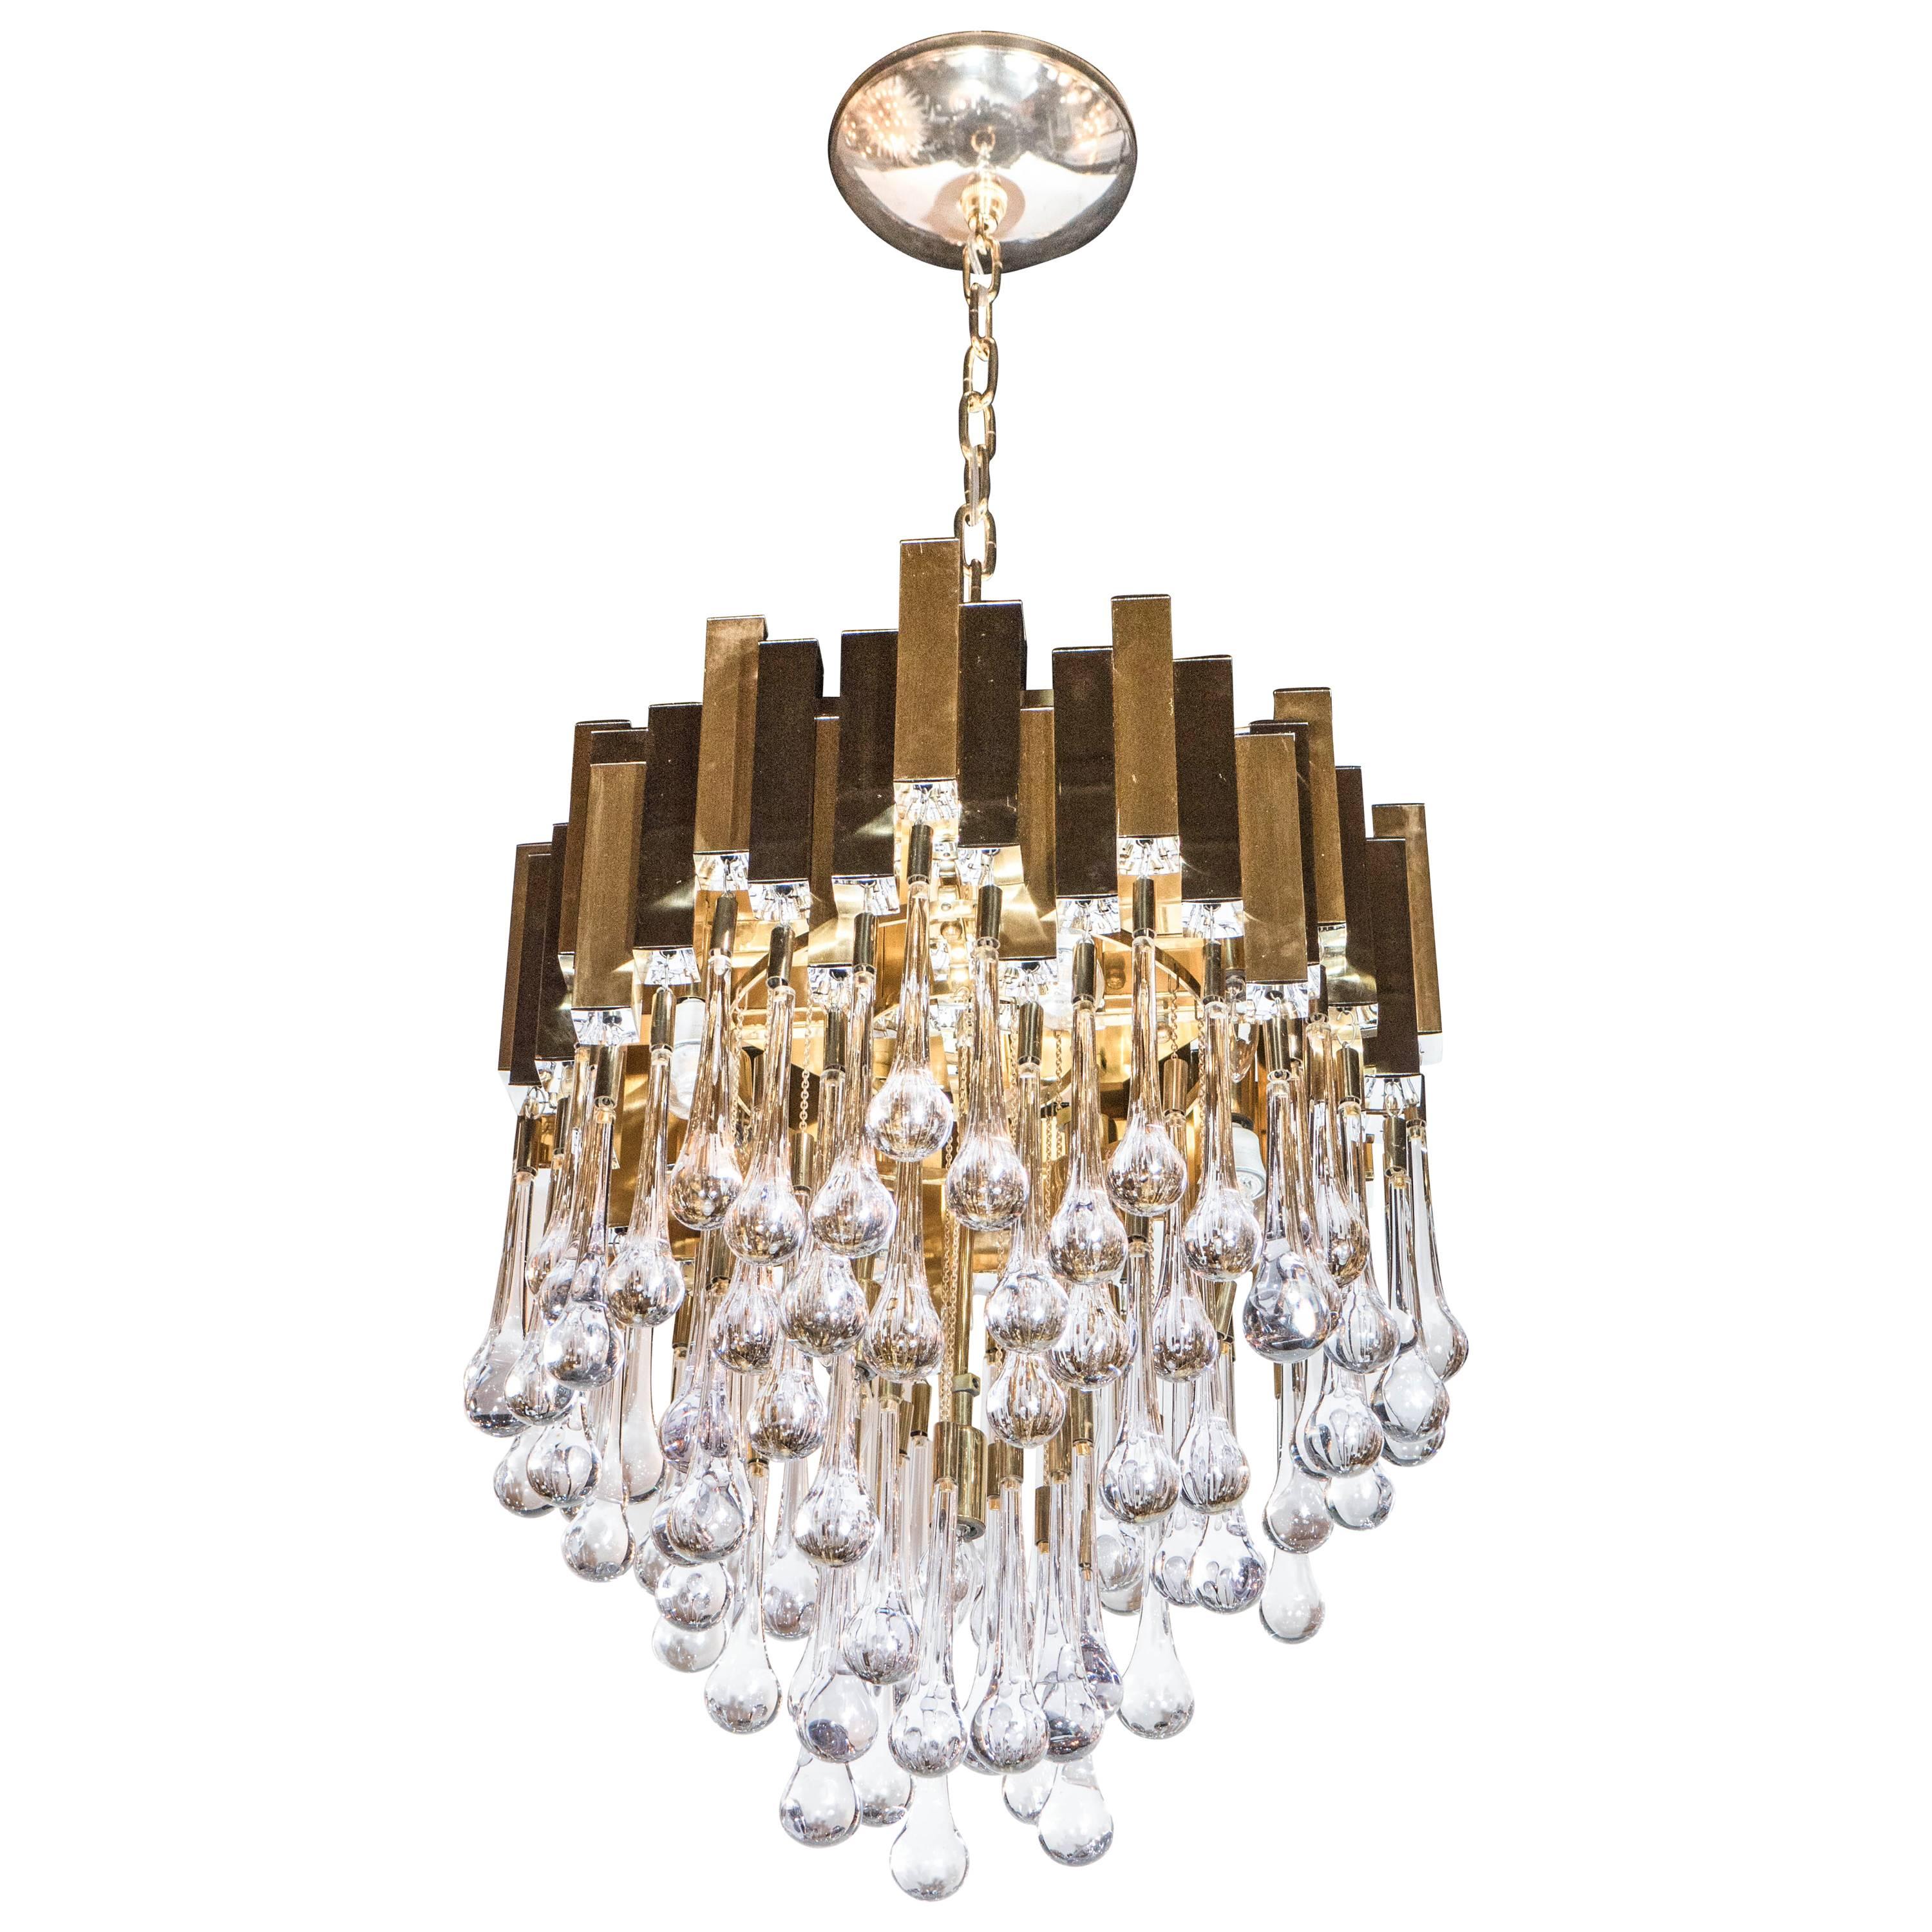 Modernist Chandelier in Brass and Crystal Droplets by Sciolari